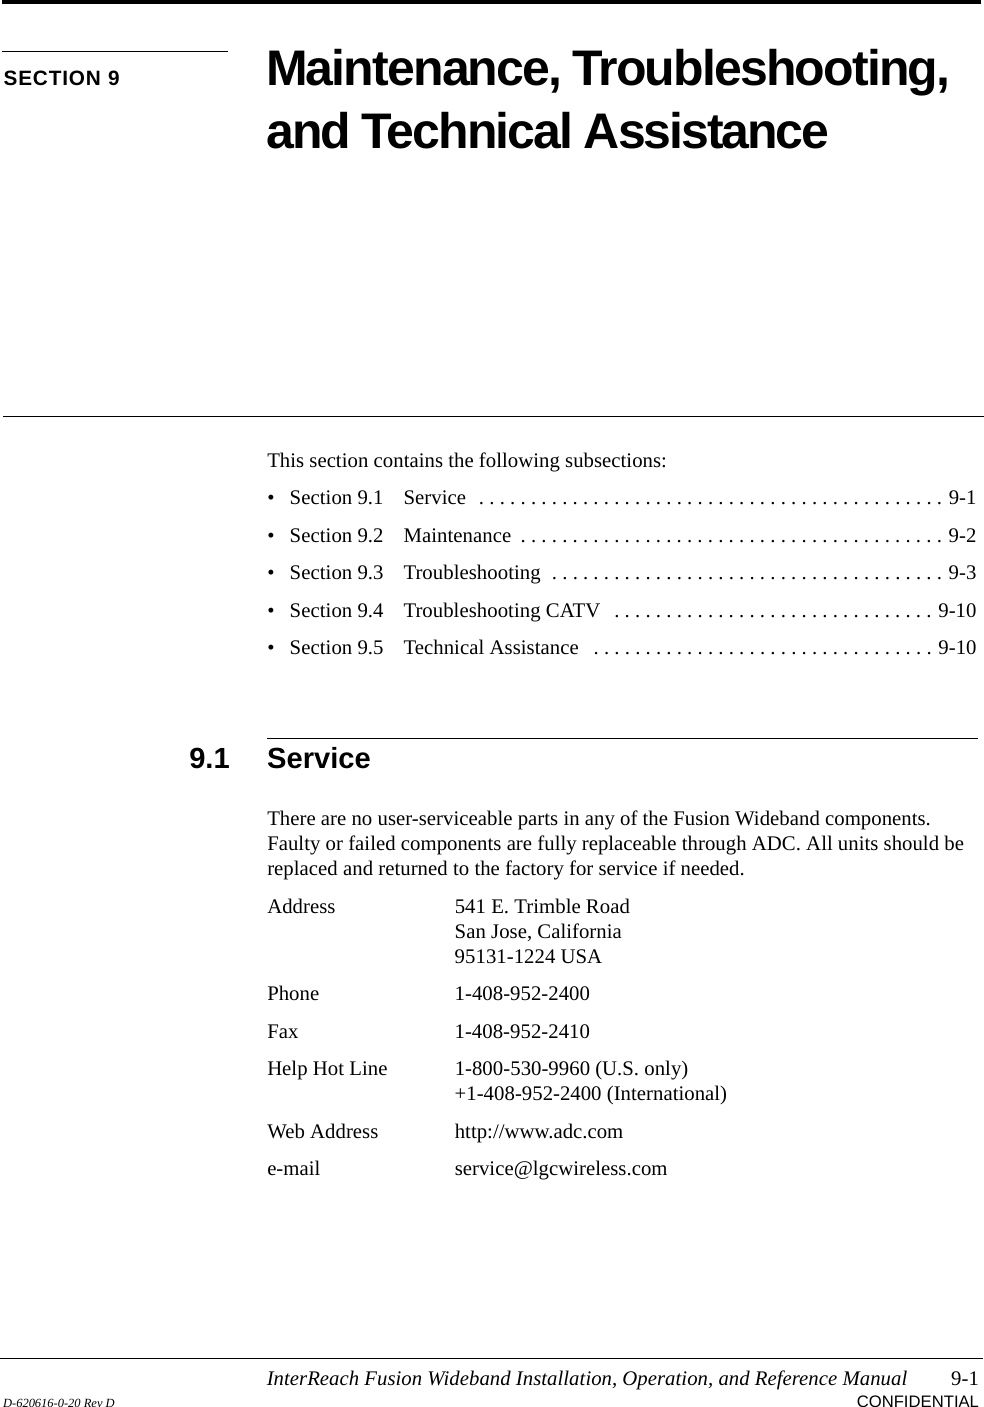 InterReach Fusion Wideband Installation, Operation, and Reference Manual 9-1D-620616-0-20 Rev D CONFIDENTIALSECTION 9 Maintenance, Troubleshooting, and Technical AssistanceThis section contains the following subsections:• Section 9.1   Service  . . . . . . . . . . . . . . . . . . . . . . . . . . . . . . . . . . . . . . . . . . . . . 9-1• Section 9.2   Maintenance  . . . . . . . . . . . . . . . . . . . . . . . . . . . . . . . . . . . . . . . . . 9-2• Section 9.3   Troubleshooting  . . . . . . . . . . . . . . . . . . . . . . . . . . . . . . . . . . . . . . 9-3• Section 9.4   Troubleshooting CATV   . . . . . . . . . . . . . . . . . . . . . . . . . . . . . . . 9-10• Section 9.5   Technical Assistance   . . . . . . . . . . . . . . . . . . . . . . . . . . . . . . . . . 9-109.1 ServiceThere are no user-serviceable parts in any of the Fusion Wideband components. Faulty or failed components are fully replaceable through ADC. All units should be replaced and returned to the factory for service if needed.Address 541 E. Trimble RoadSan Jose, California95131-1224 USAPhone 1-408-952-2400Fax 1-408-952-2410Help Hot Line 1-800-530-9960 (U.S. only)+1-408-952-2400 (International)Web Address http://www.adc.come-mail service@lgcwireless.com